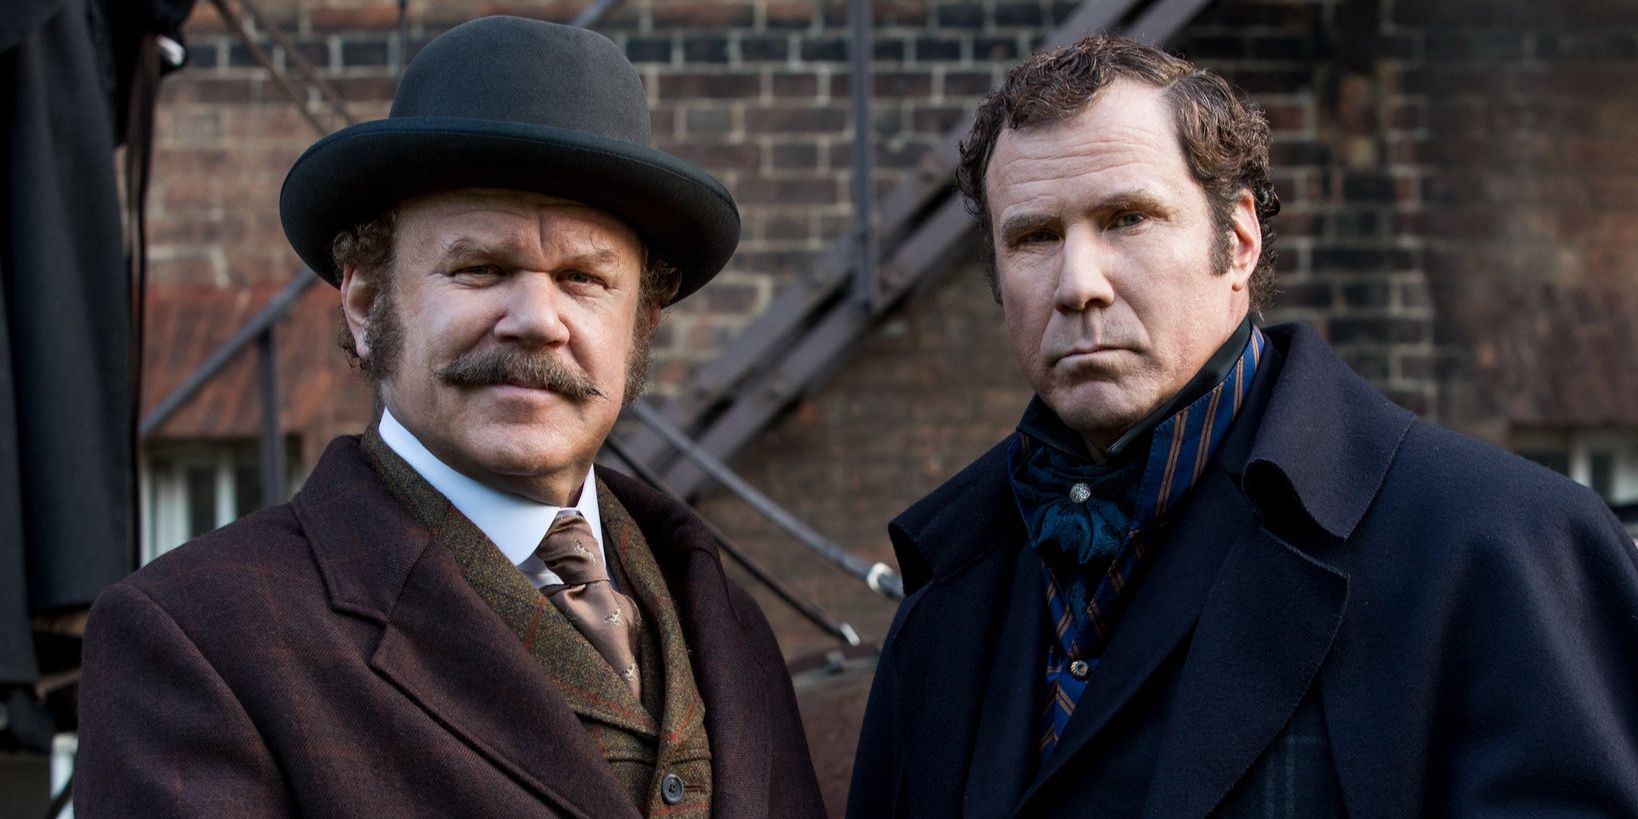 John C. Riley and Will Ferrell as Holmes And Watson